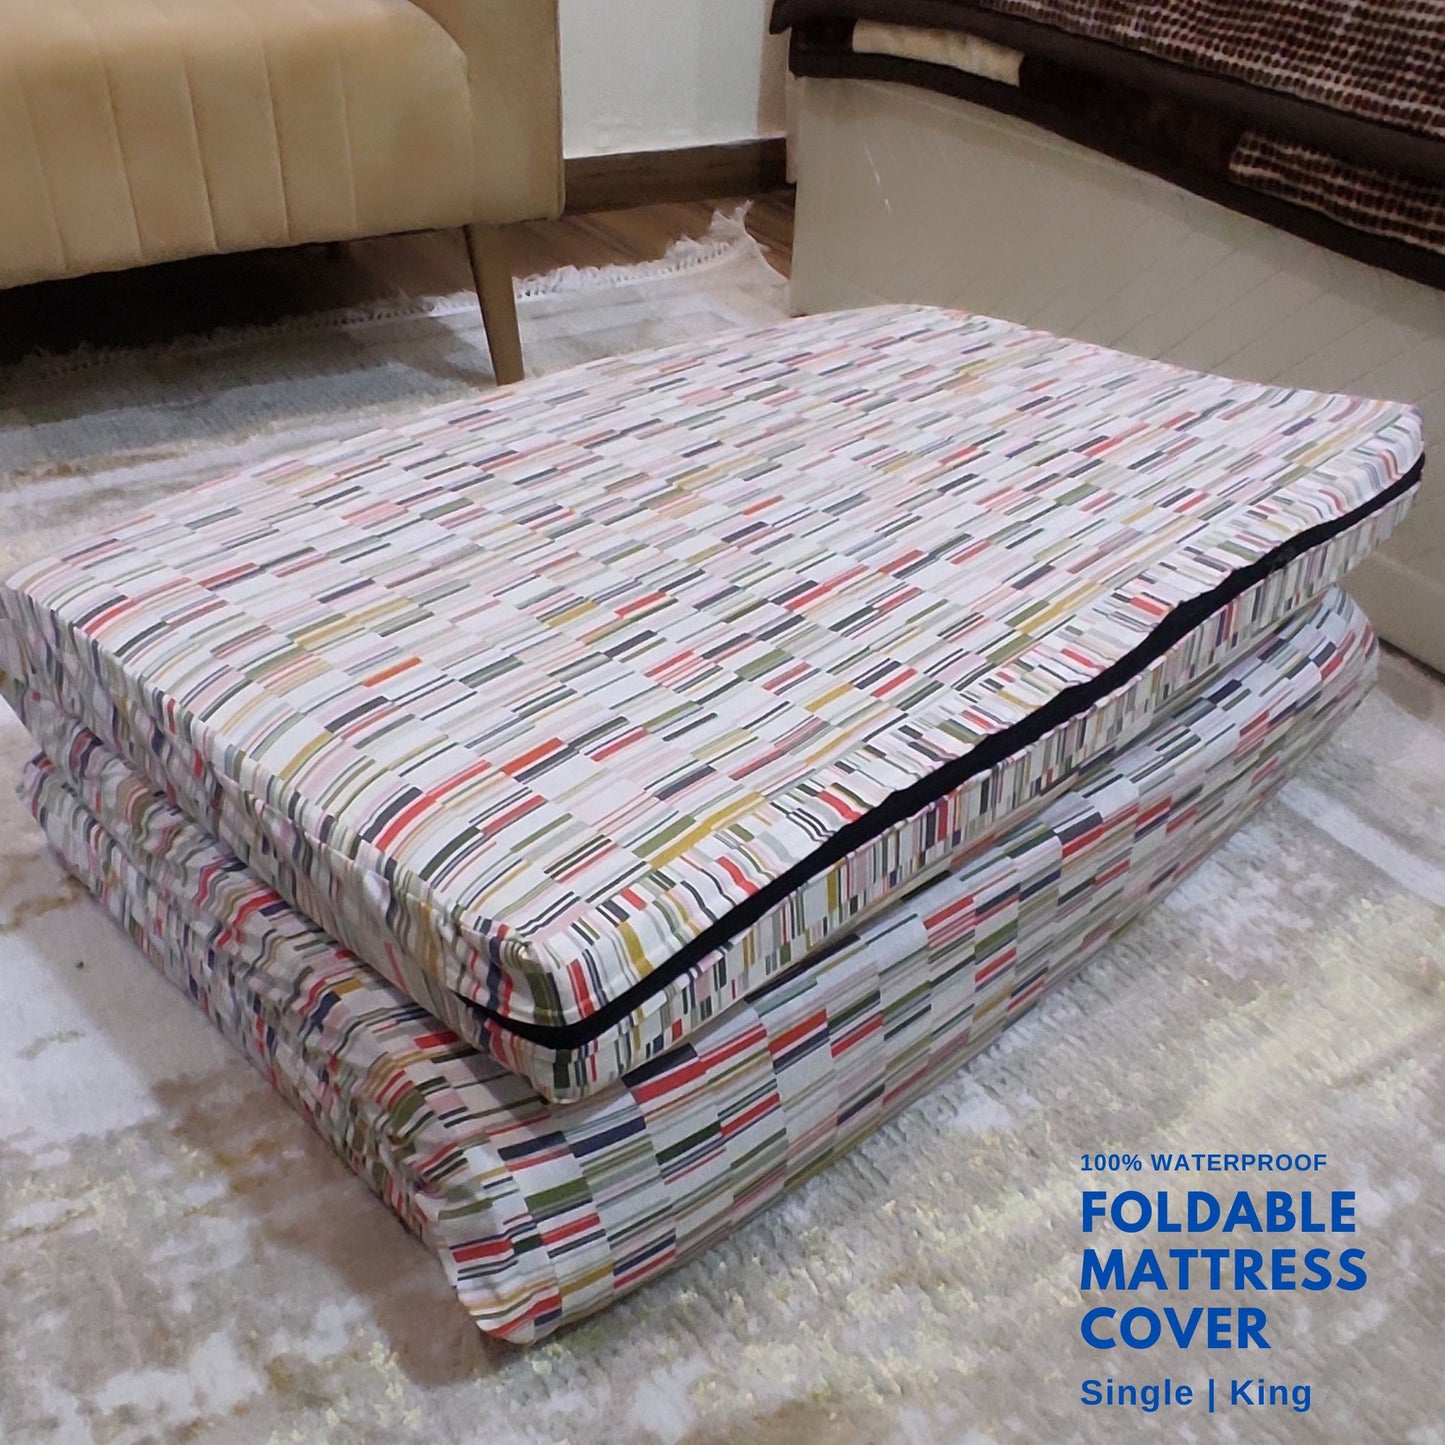 Foldable Mattress Cover